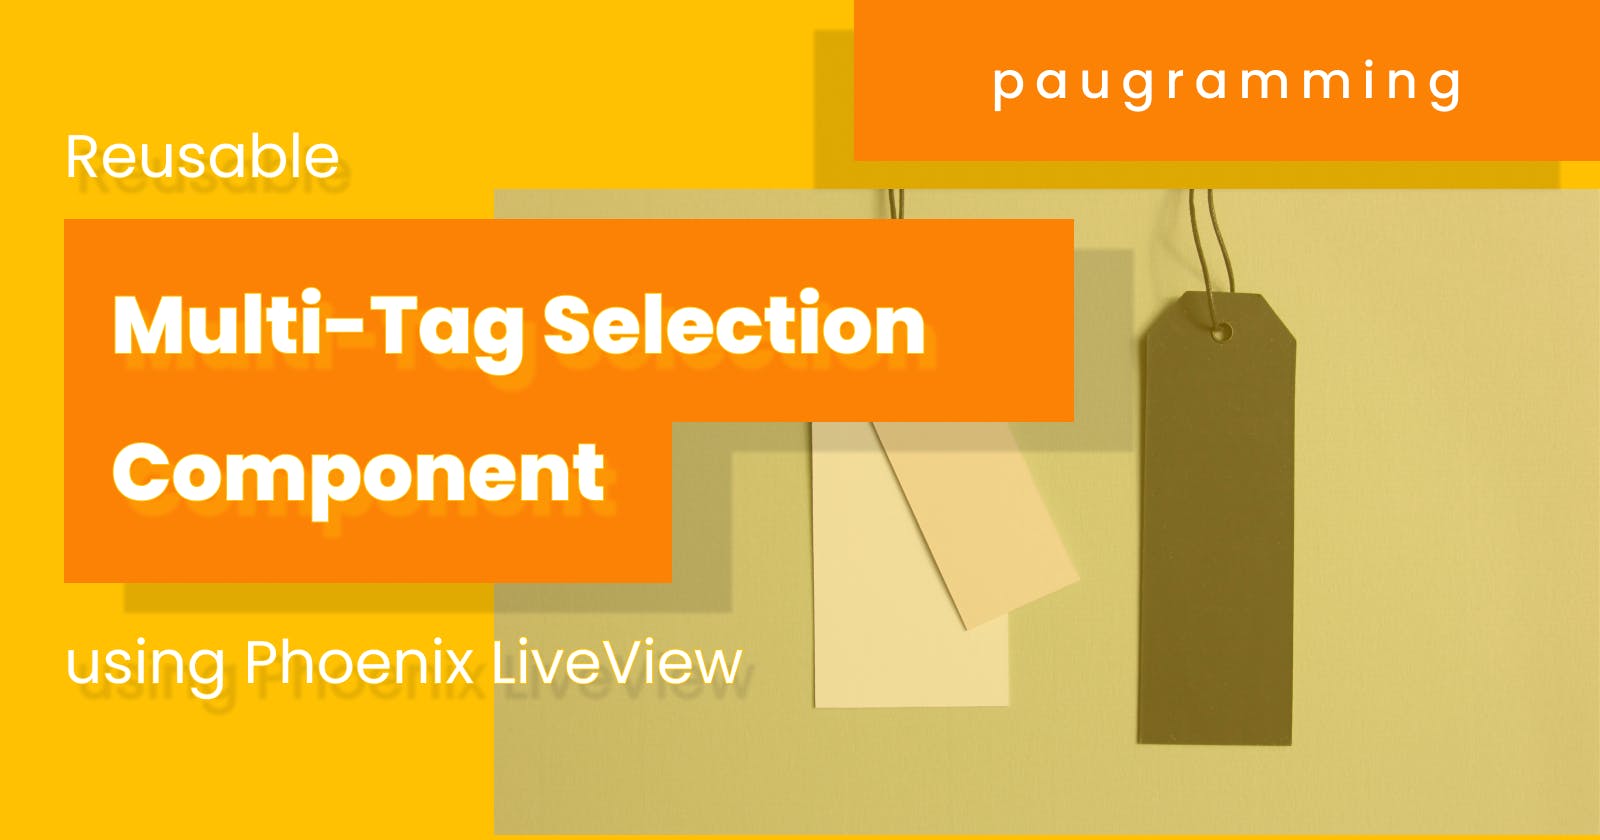 A Reusable Multi-Tag Selection Component for Phoenix LiveView